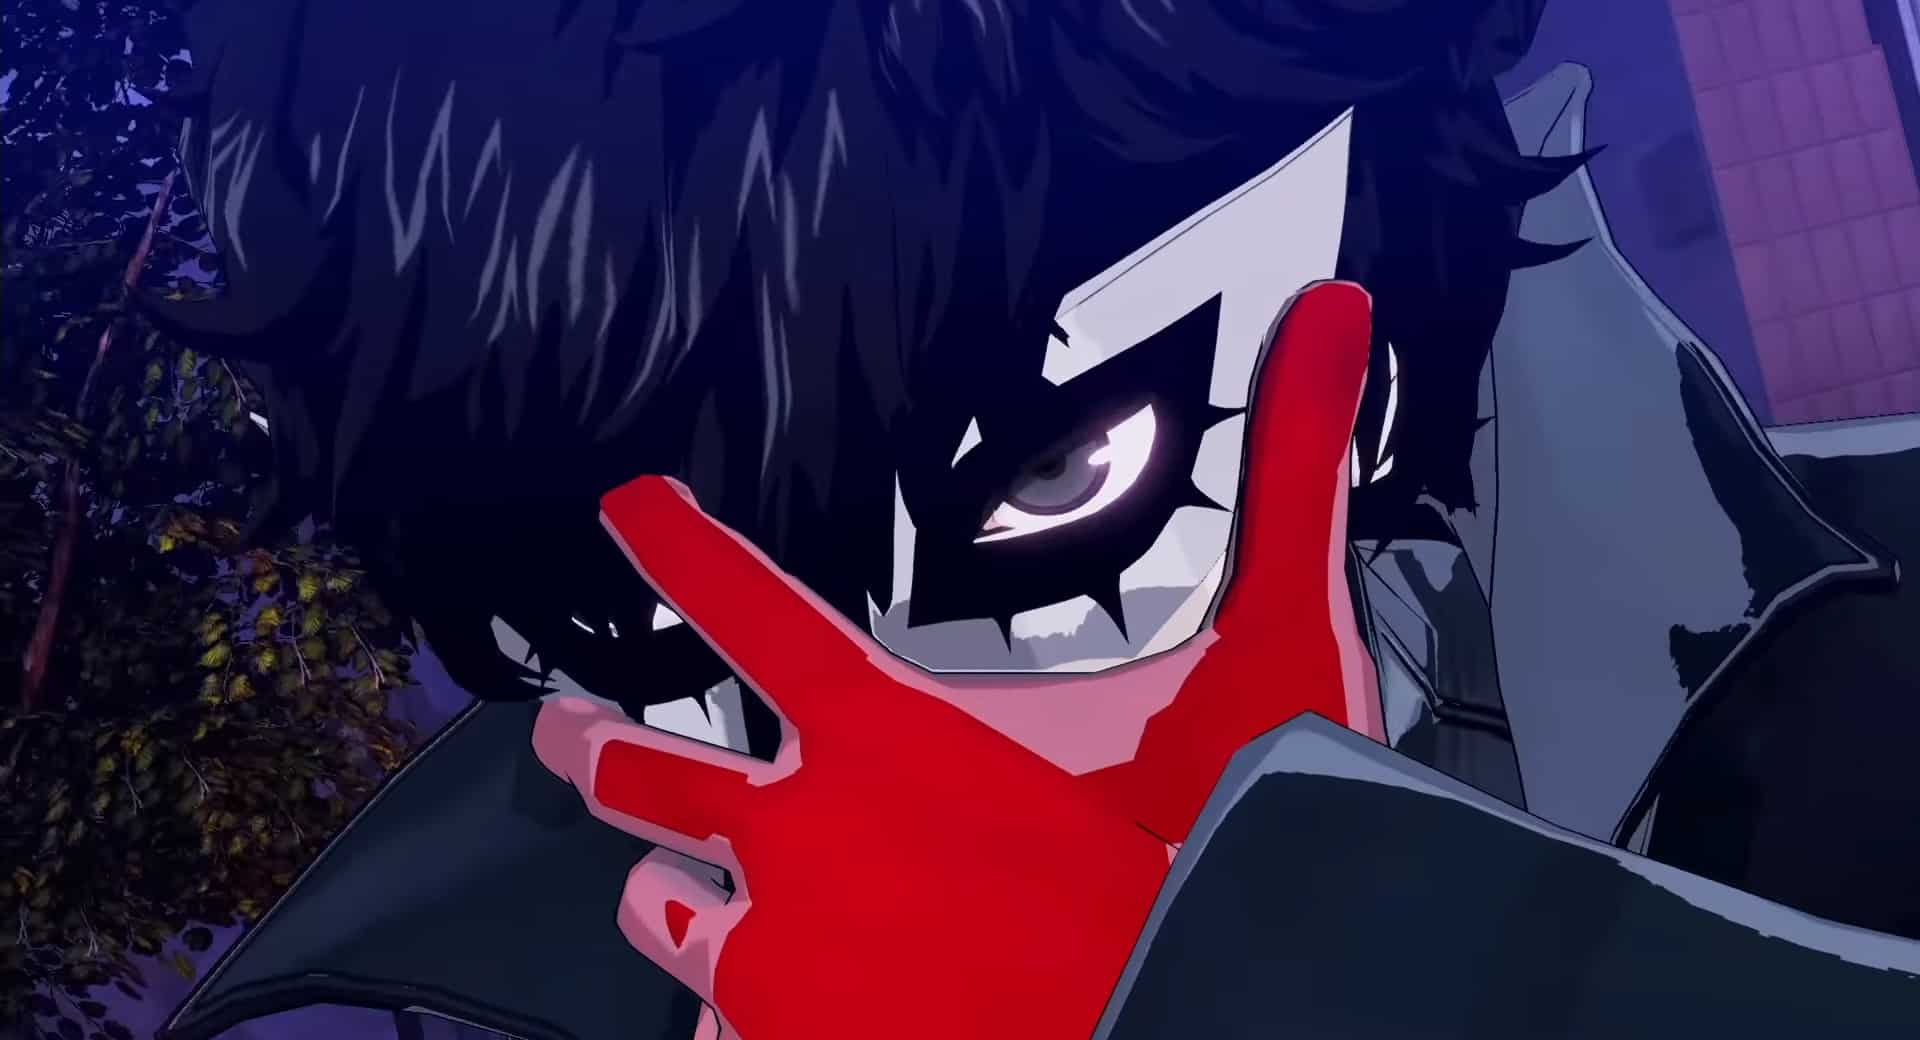 Persona 5 Scramble: The Phantom Strikers announced for Switch